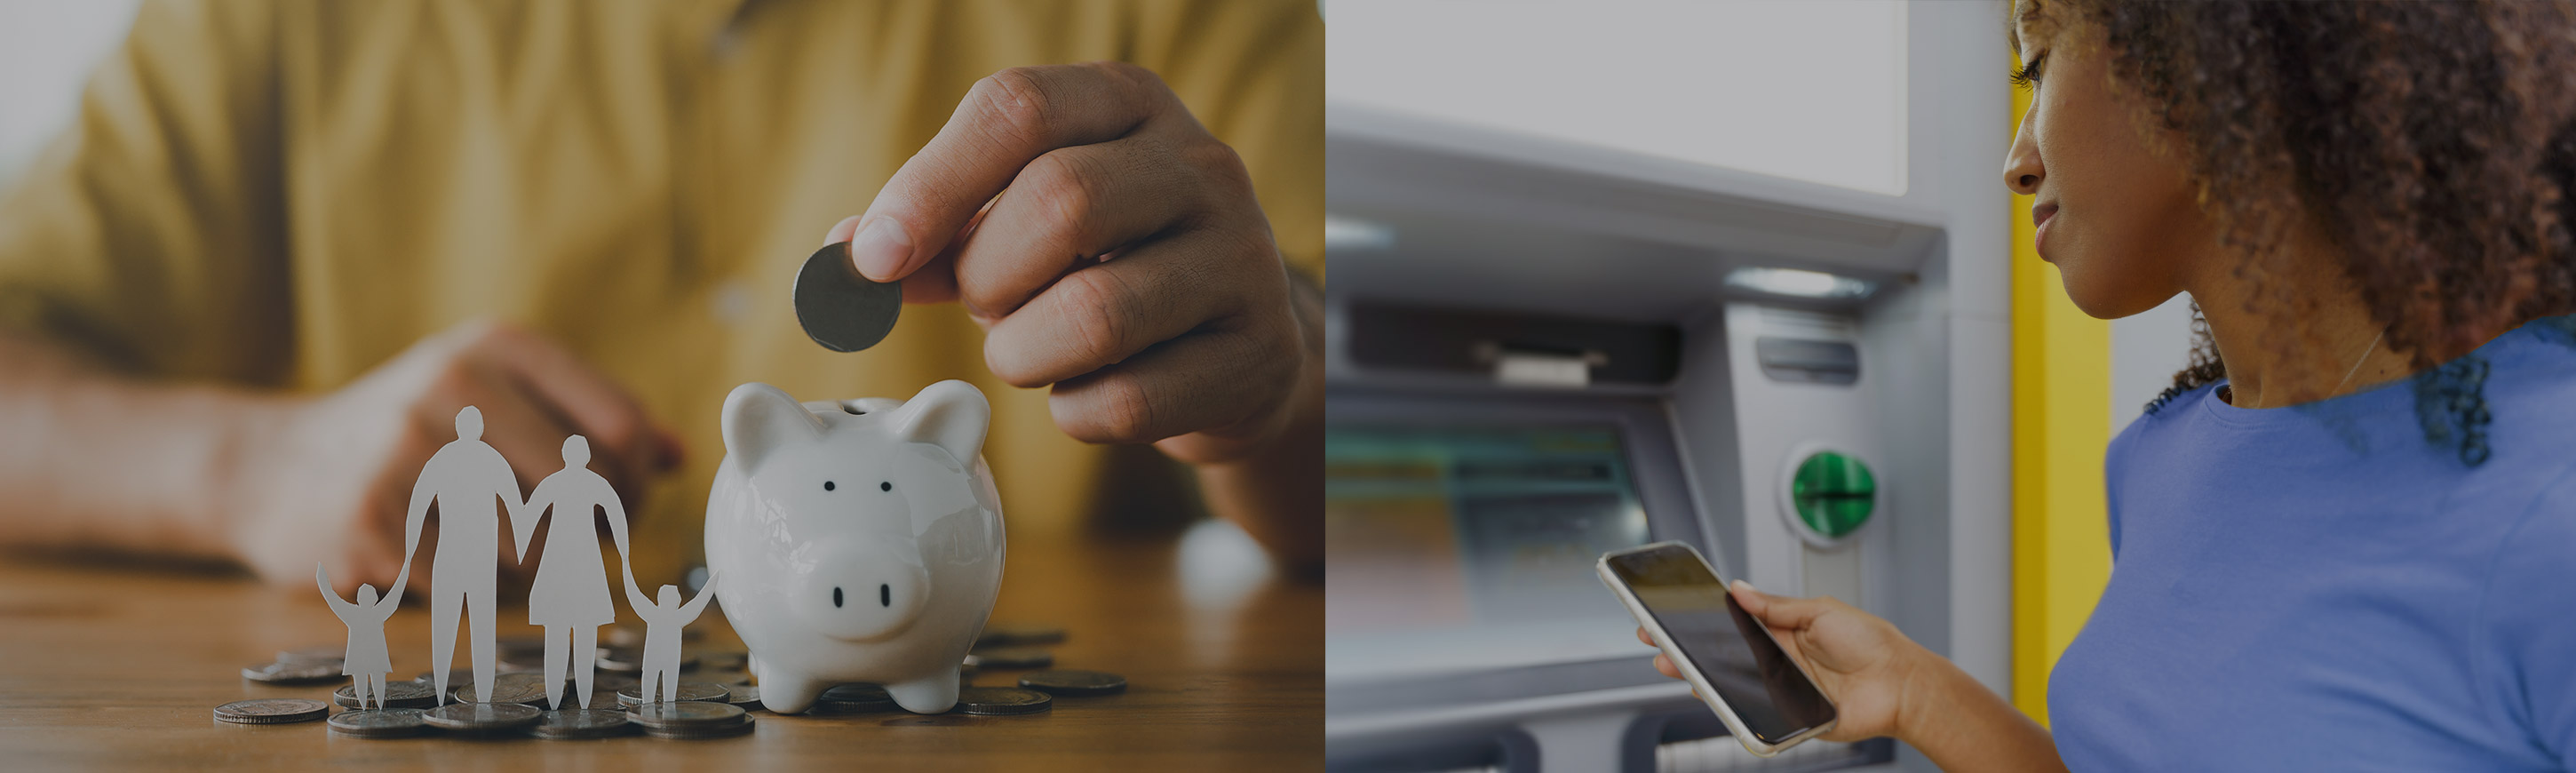 Two images side by side - one is a person putting a coin in a piggy bank and the other is a woman looking at her phone standing in front of an ATM machine